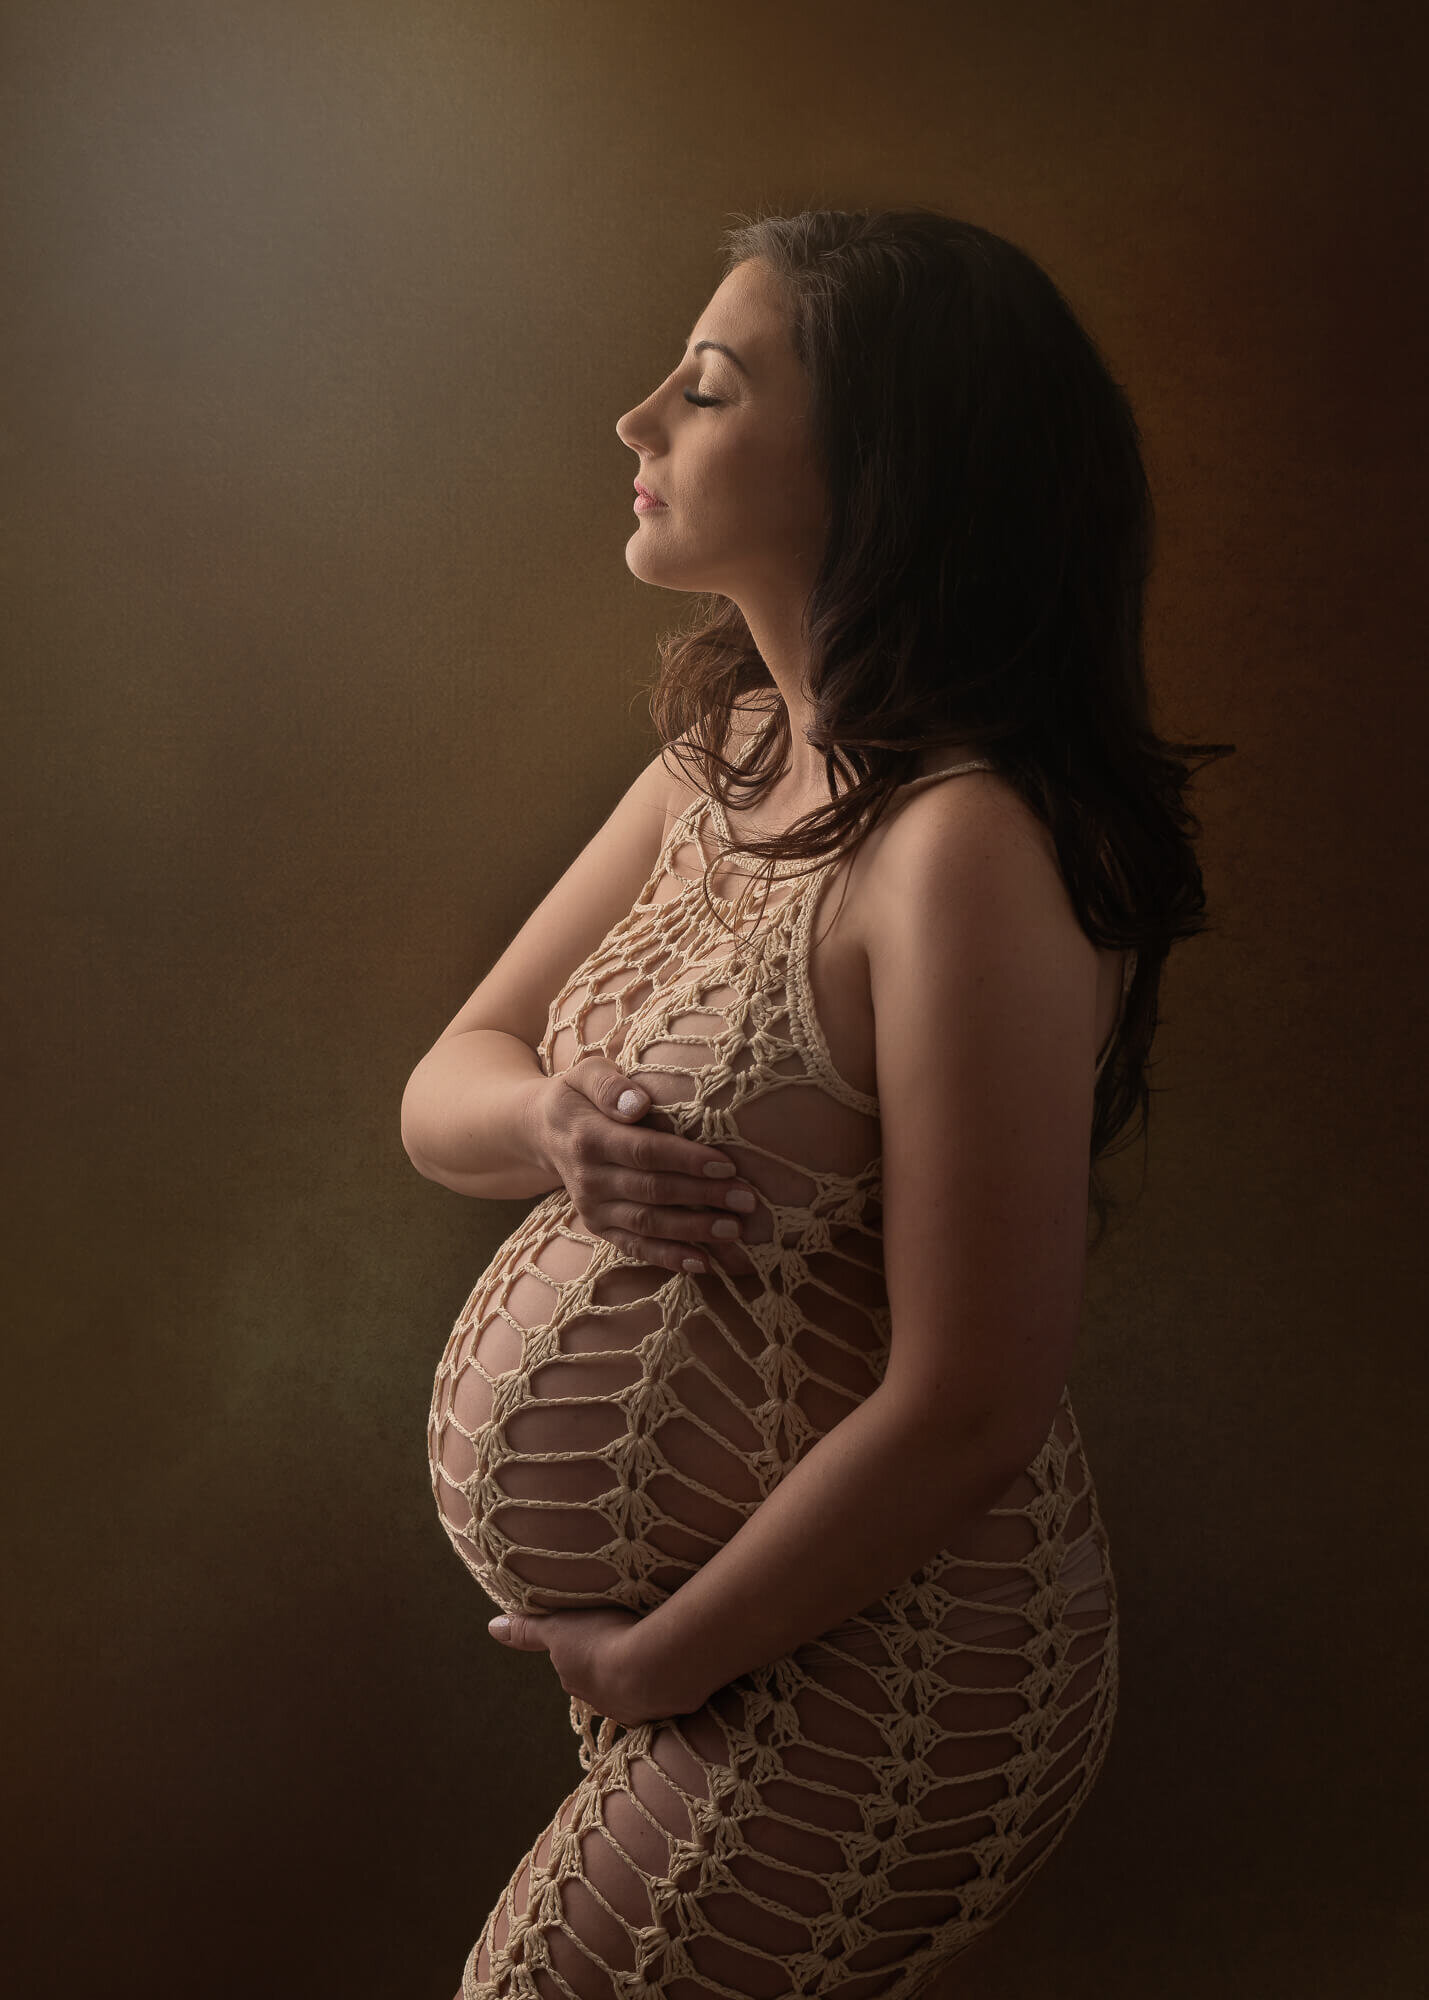 Implied nudity maternity picture